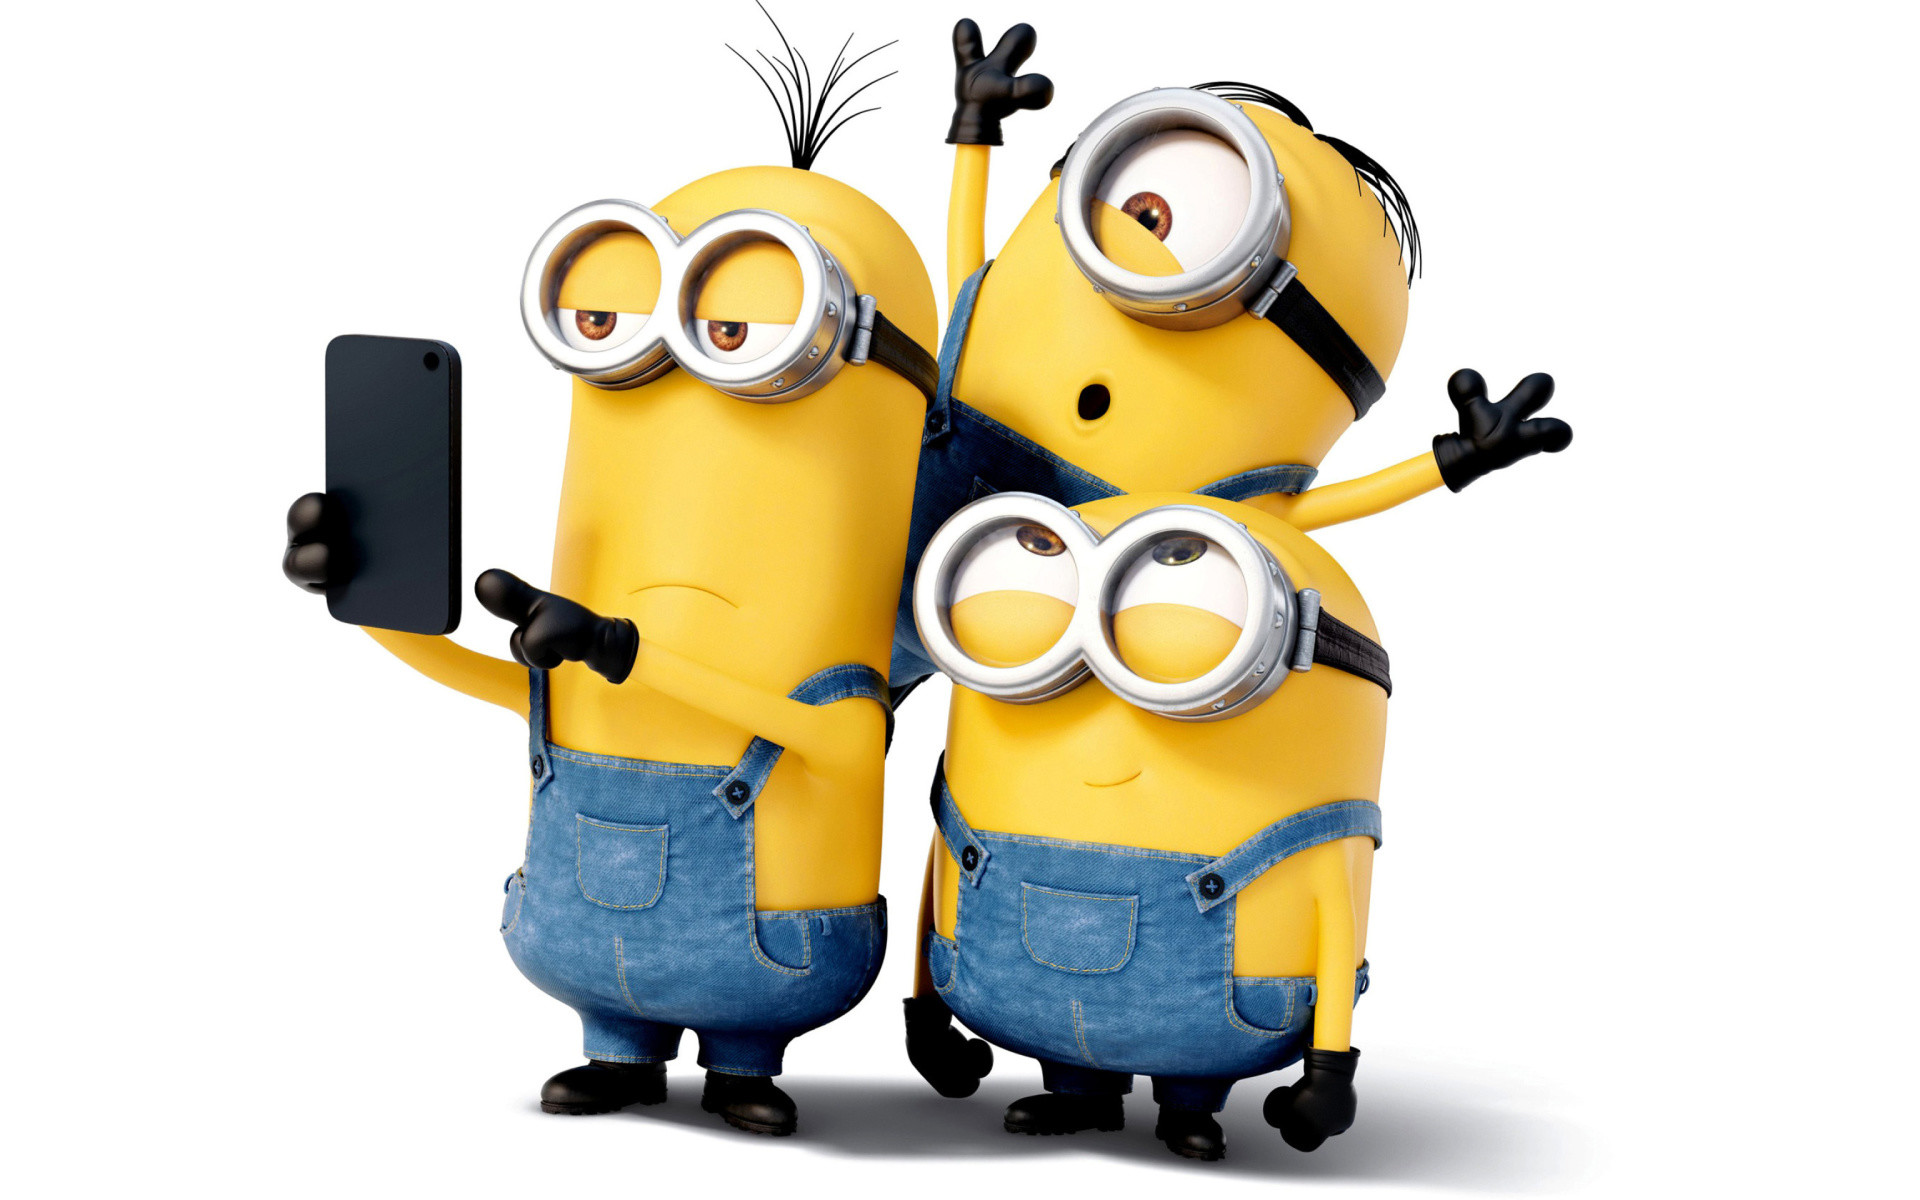  on We Heart It  Minions wallpaper Minion pictures Minions love